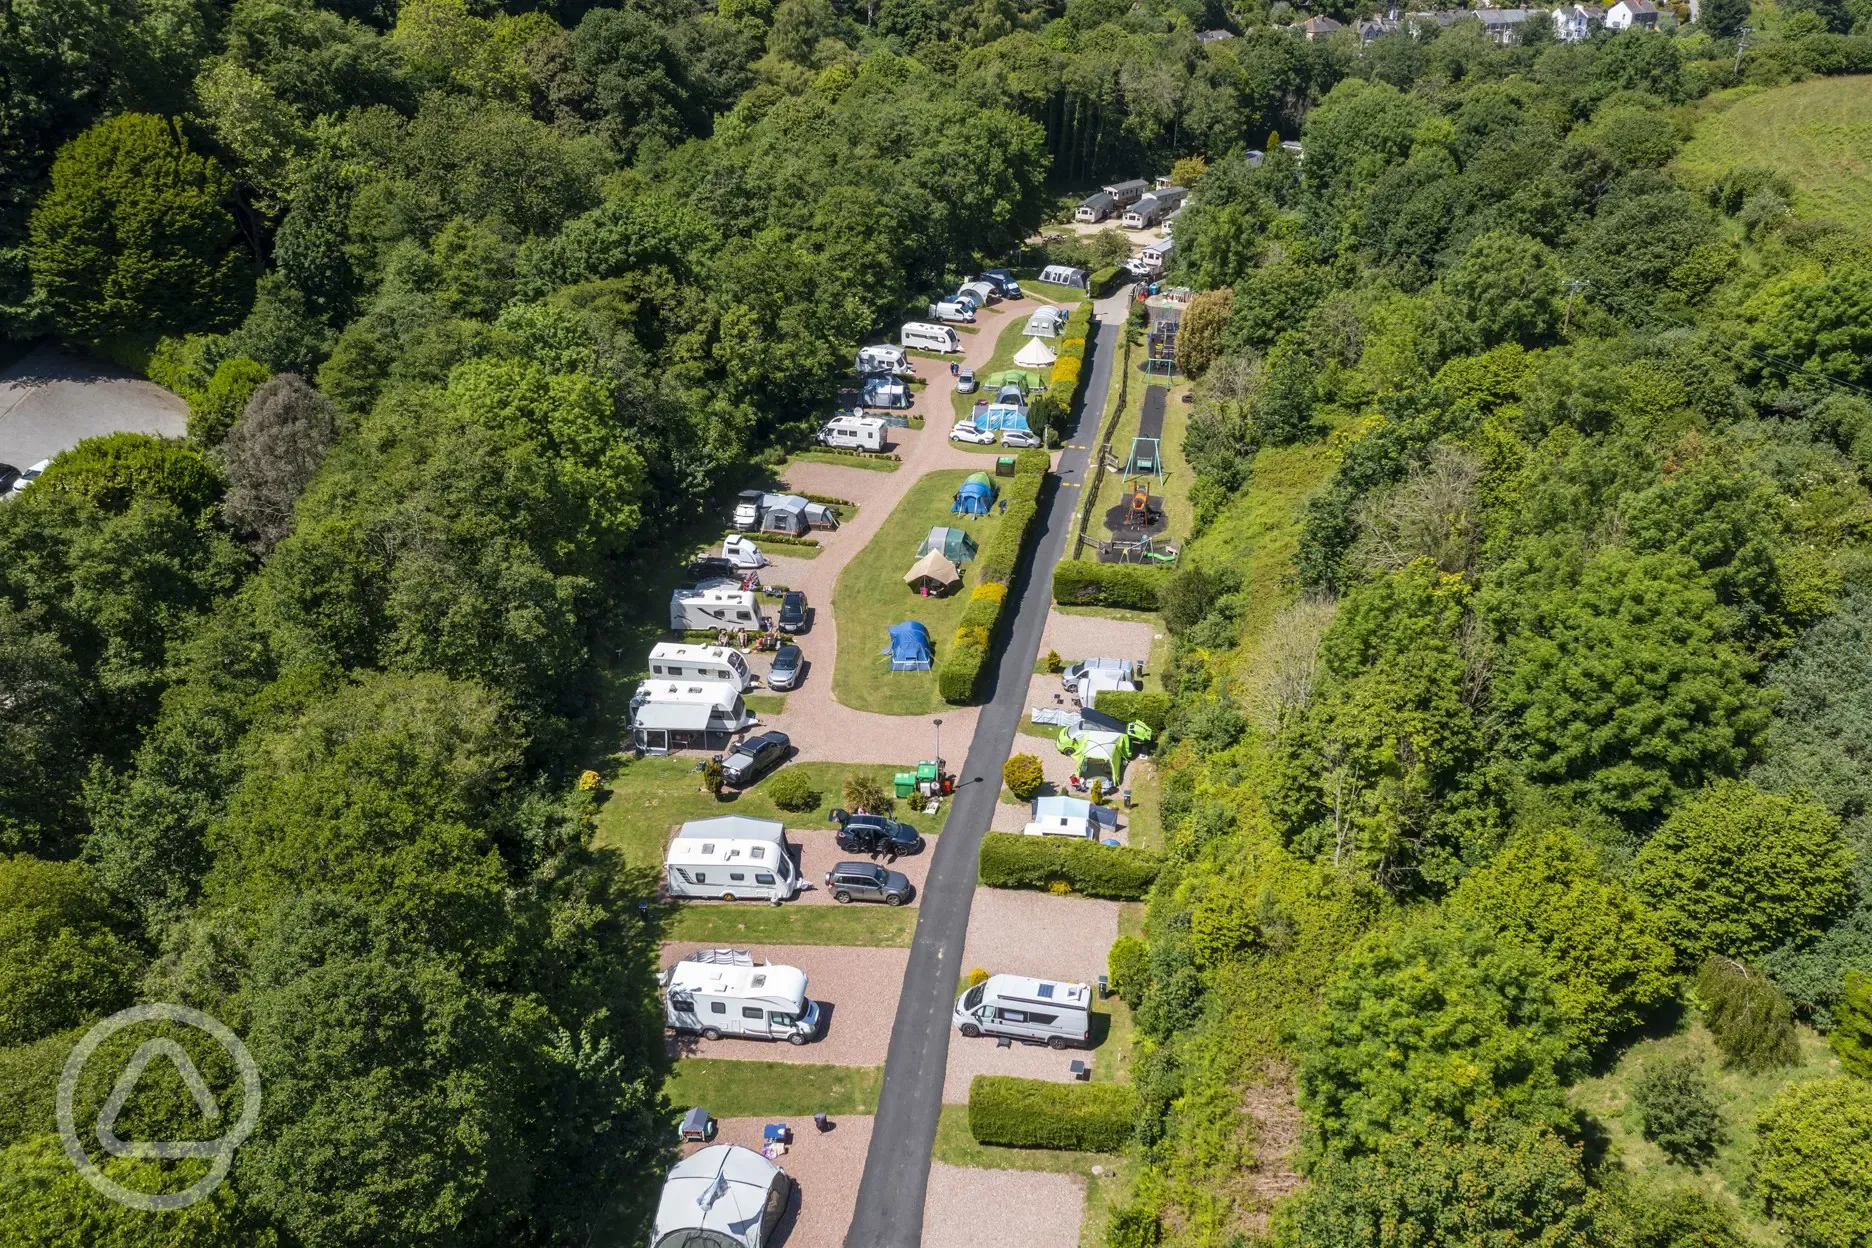 Aerial view of the fully serviced pitches